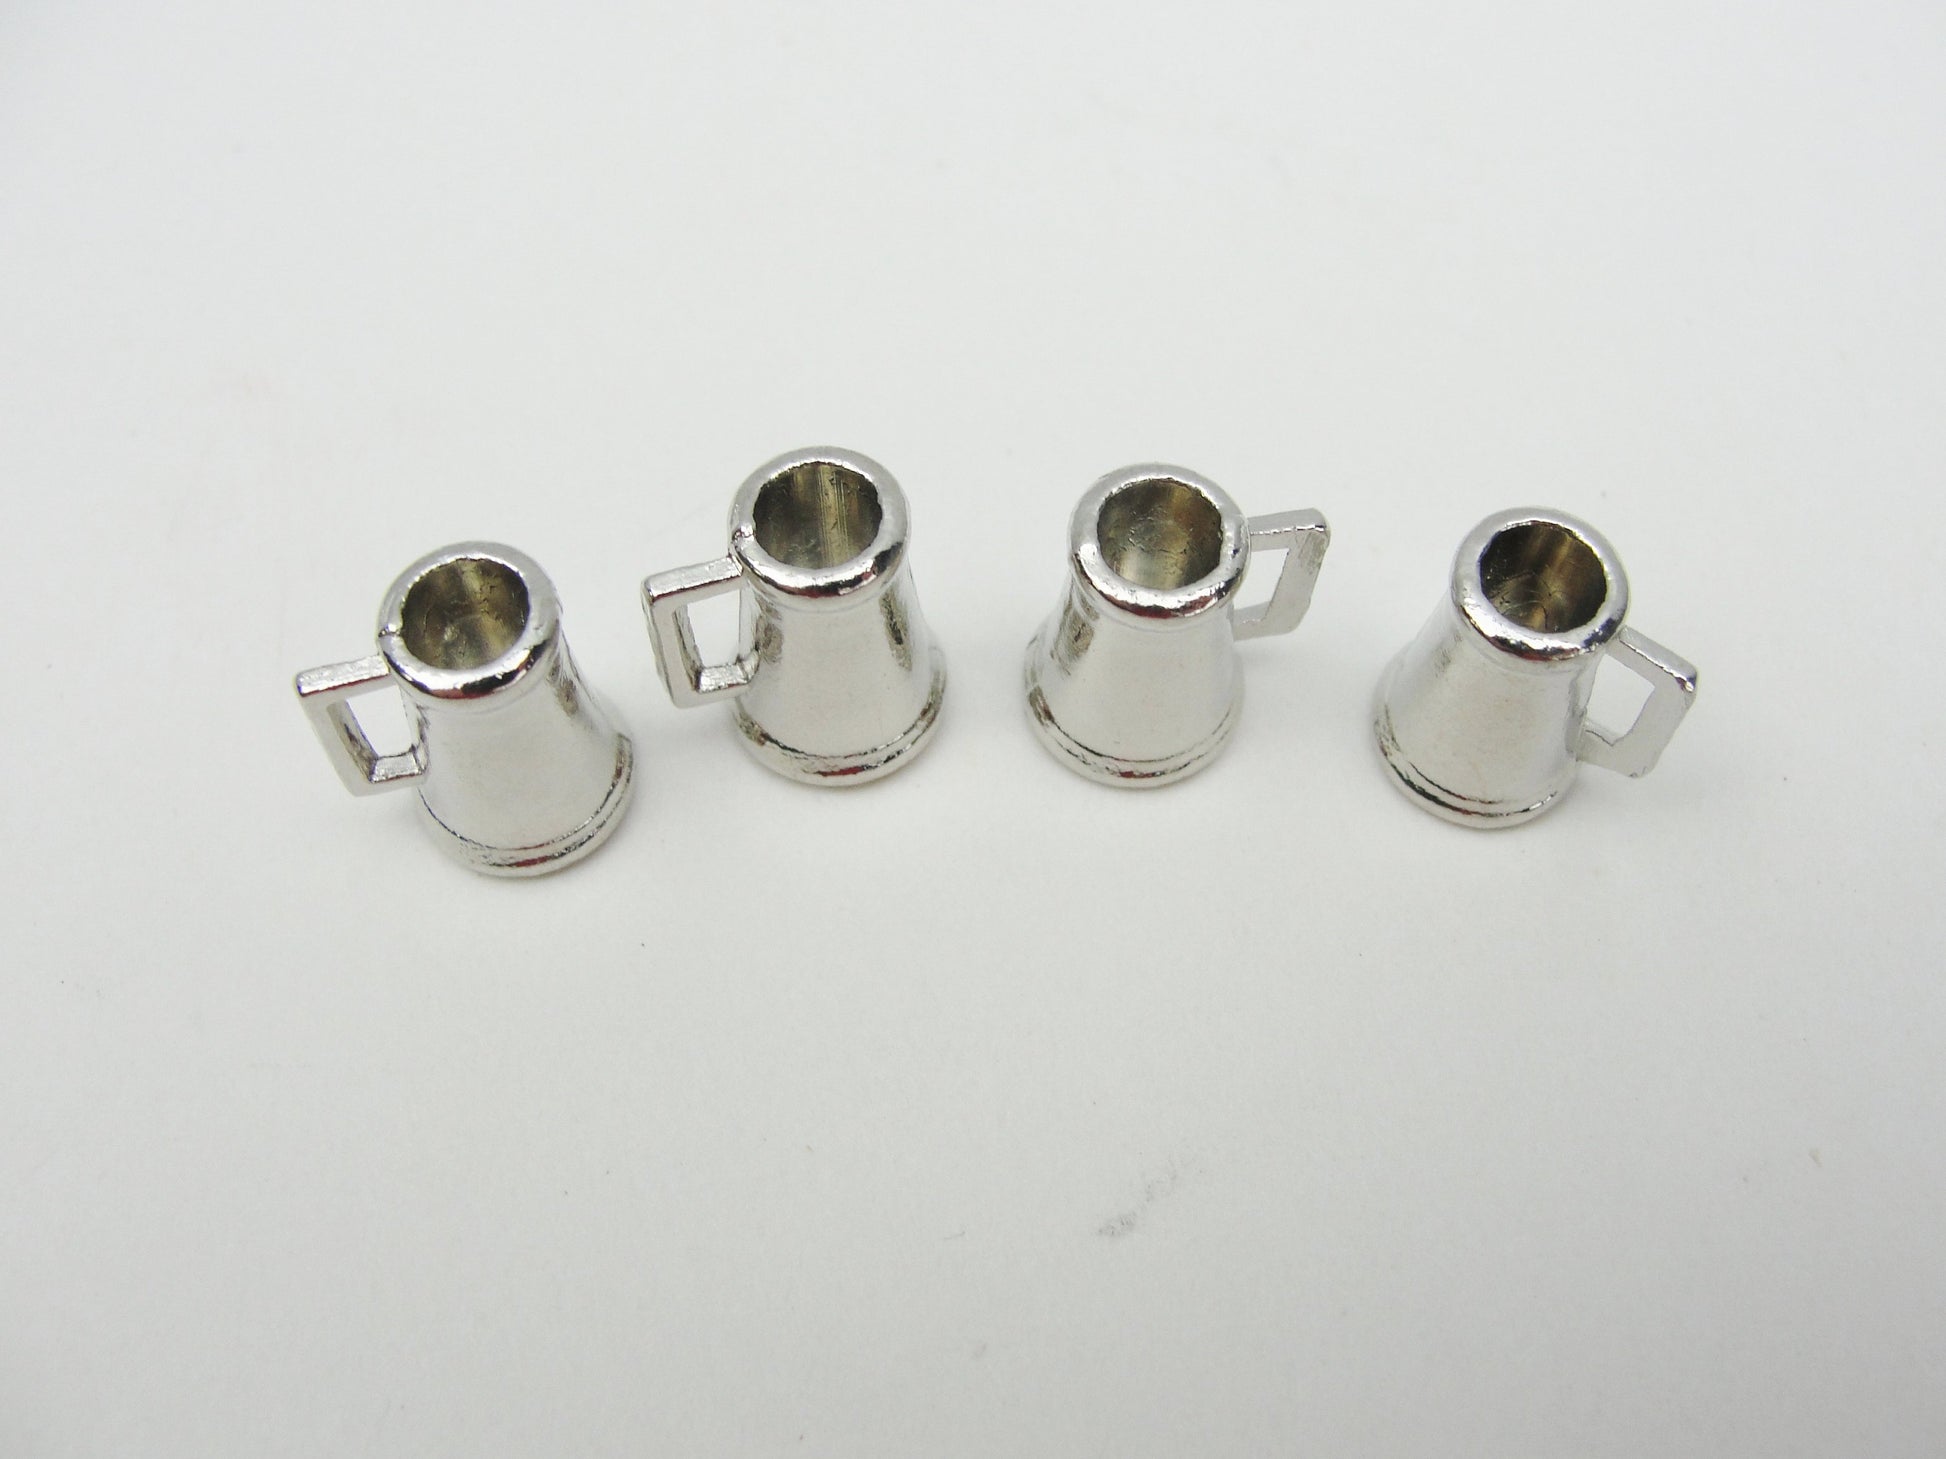 Dollhouse miniature metal cups, steins, beer mugs, or tankards - Miniatures - Craft Supply House